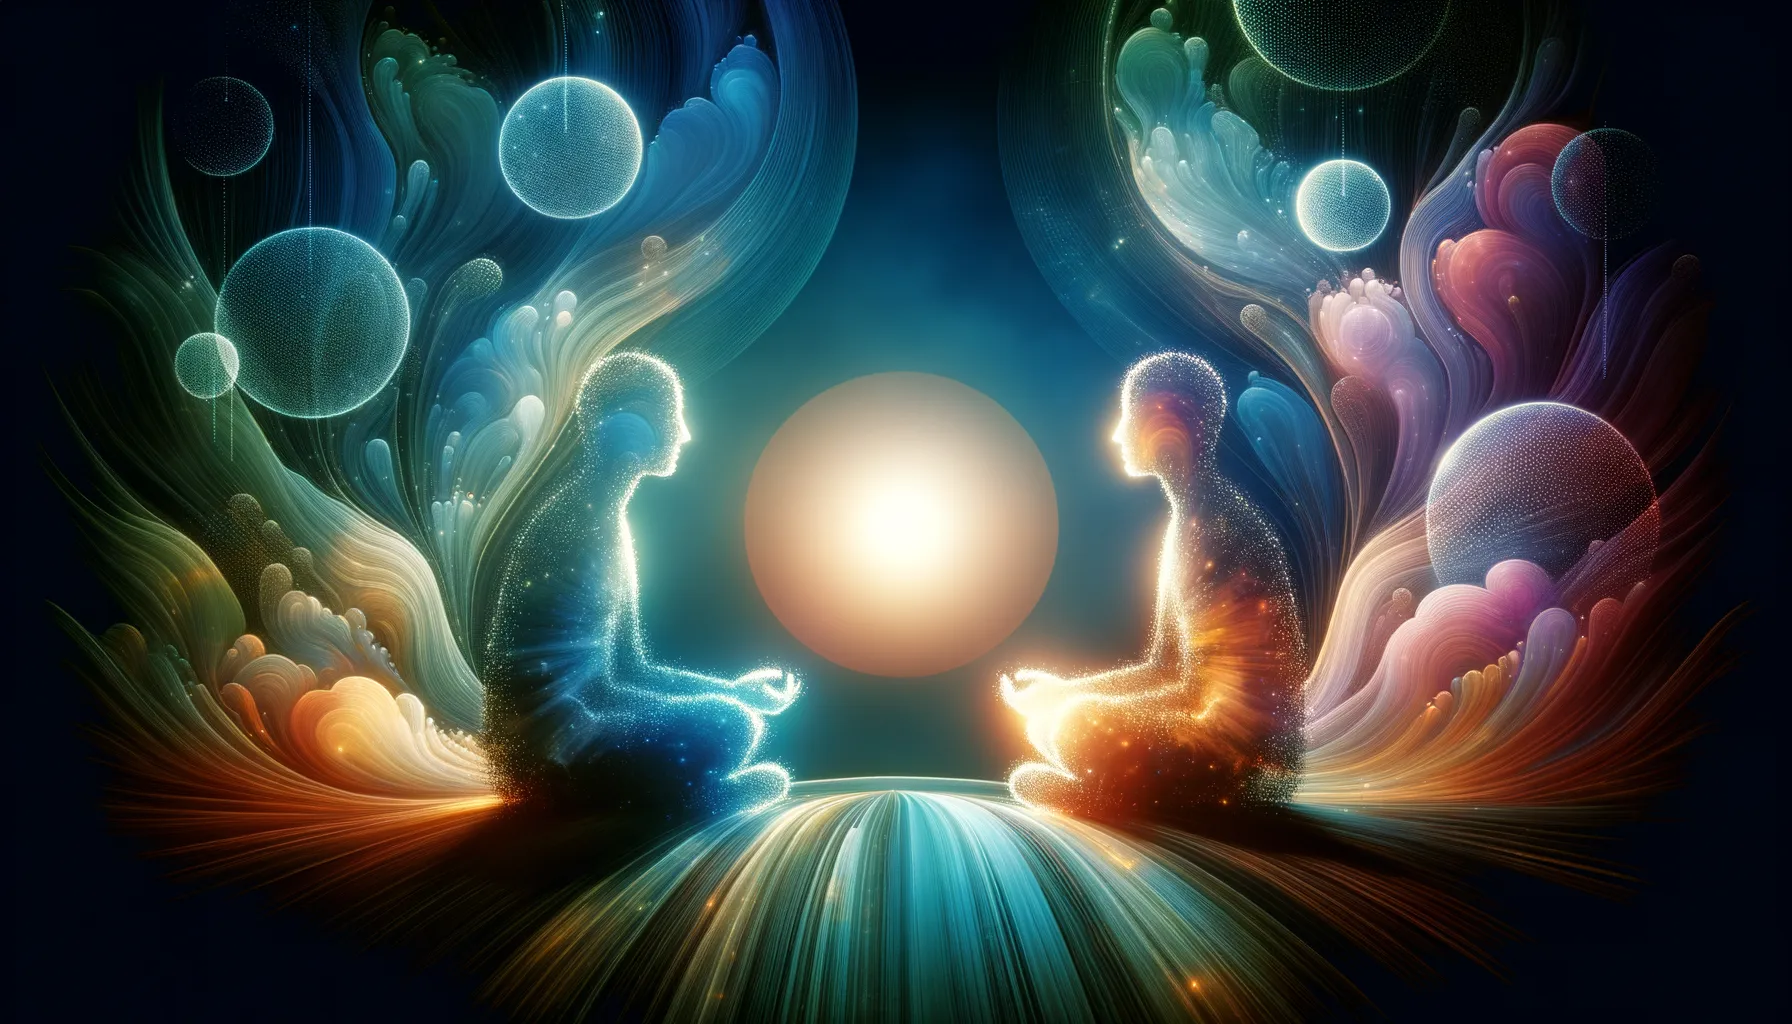 In the garden of connection, two souls engage in the dance of dialogue, their words weaving a tapestry of understanding, respect, and shared growth.